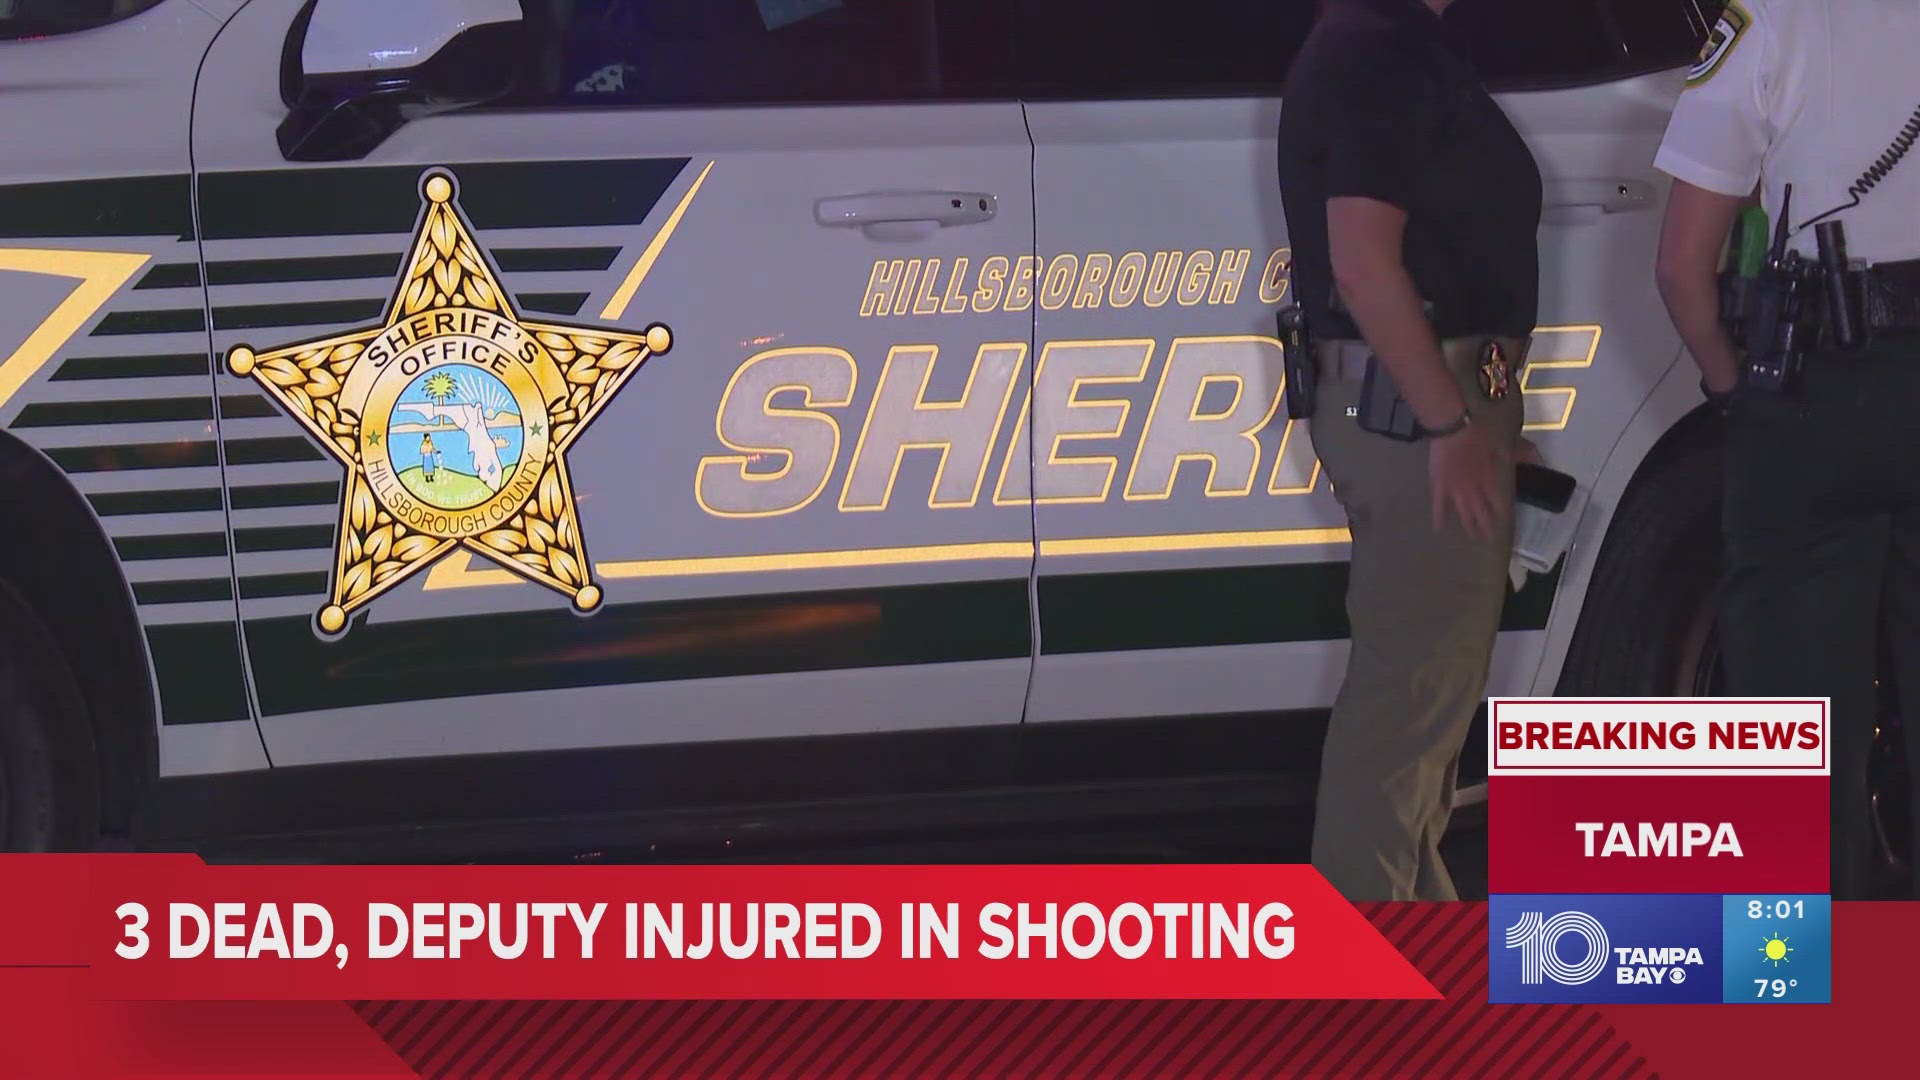 A 19-year-old man shot and killed his parents and then fired shots at deputies responding to the scene. He was killed at the scene on Saturday night.